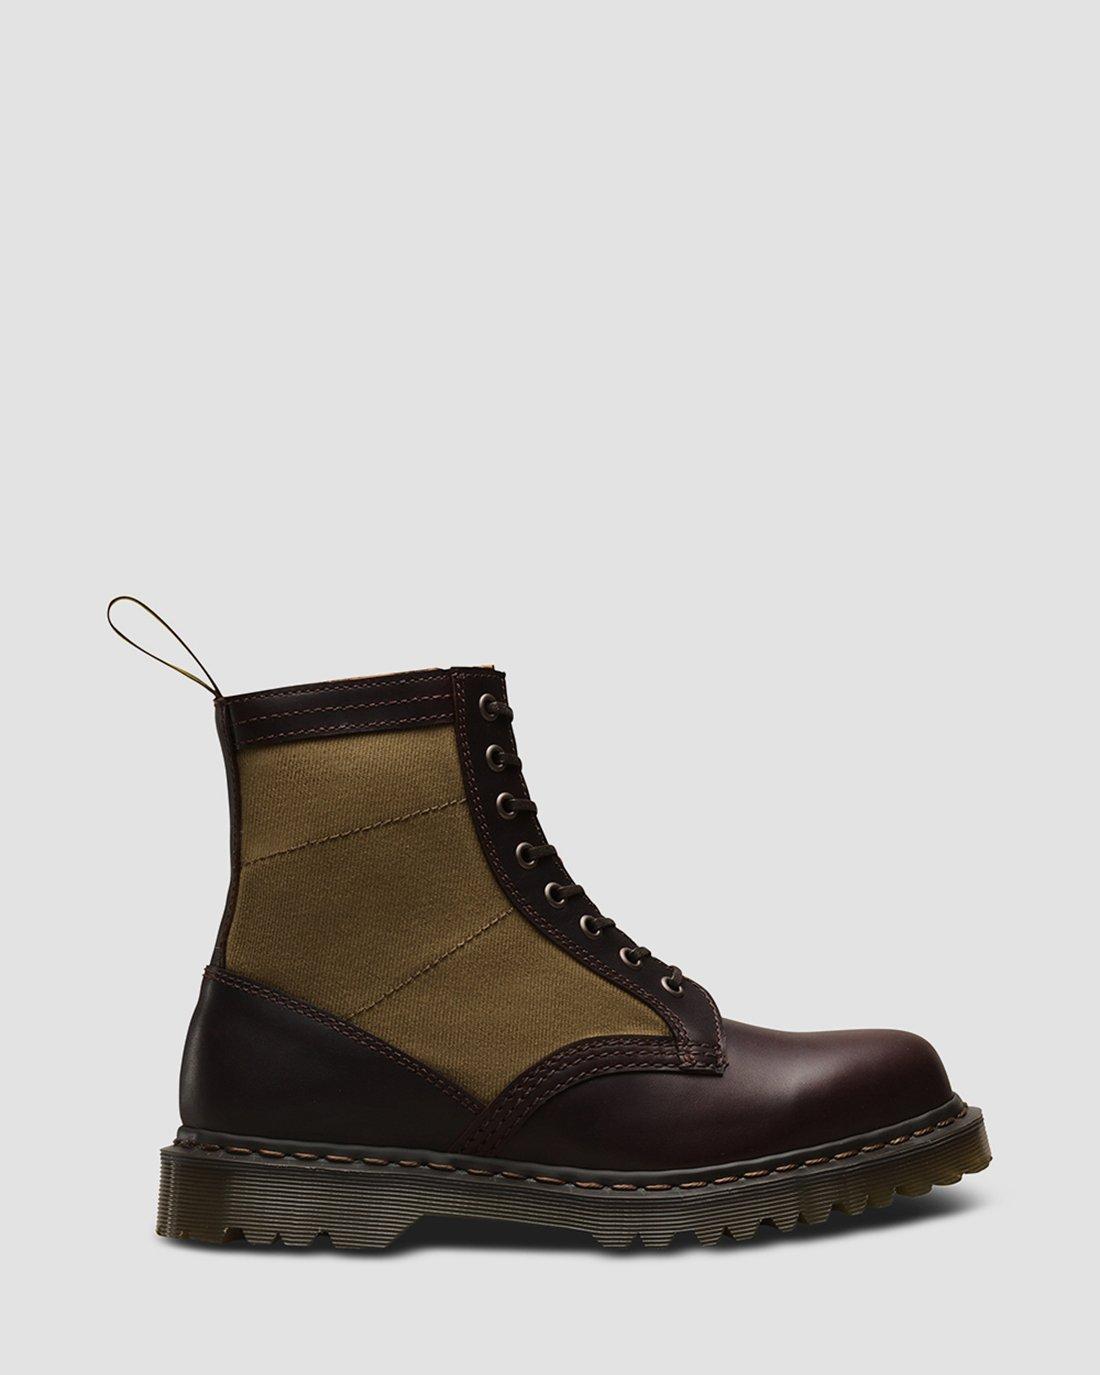 1460 PASCAL ANTIQUE TWILL Dr. Martens